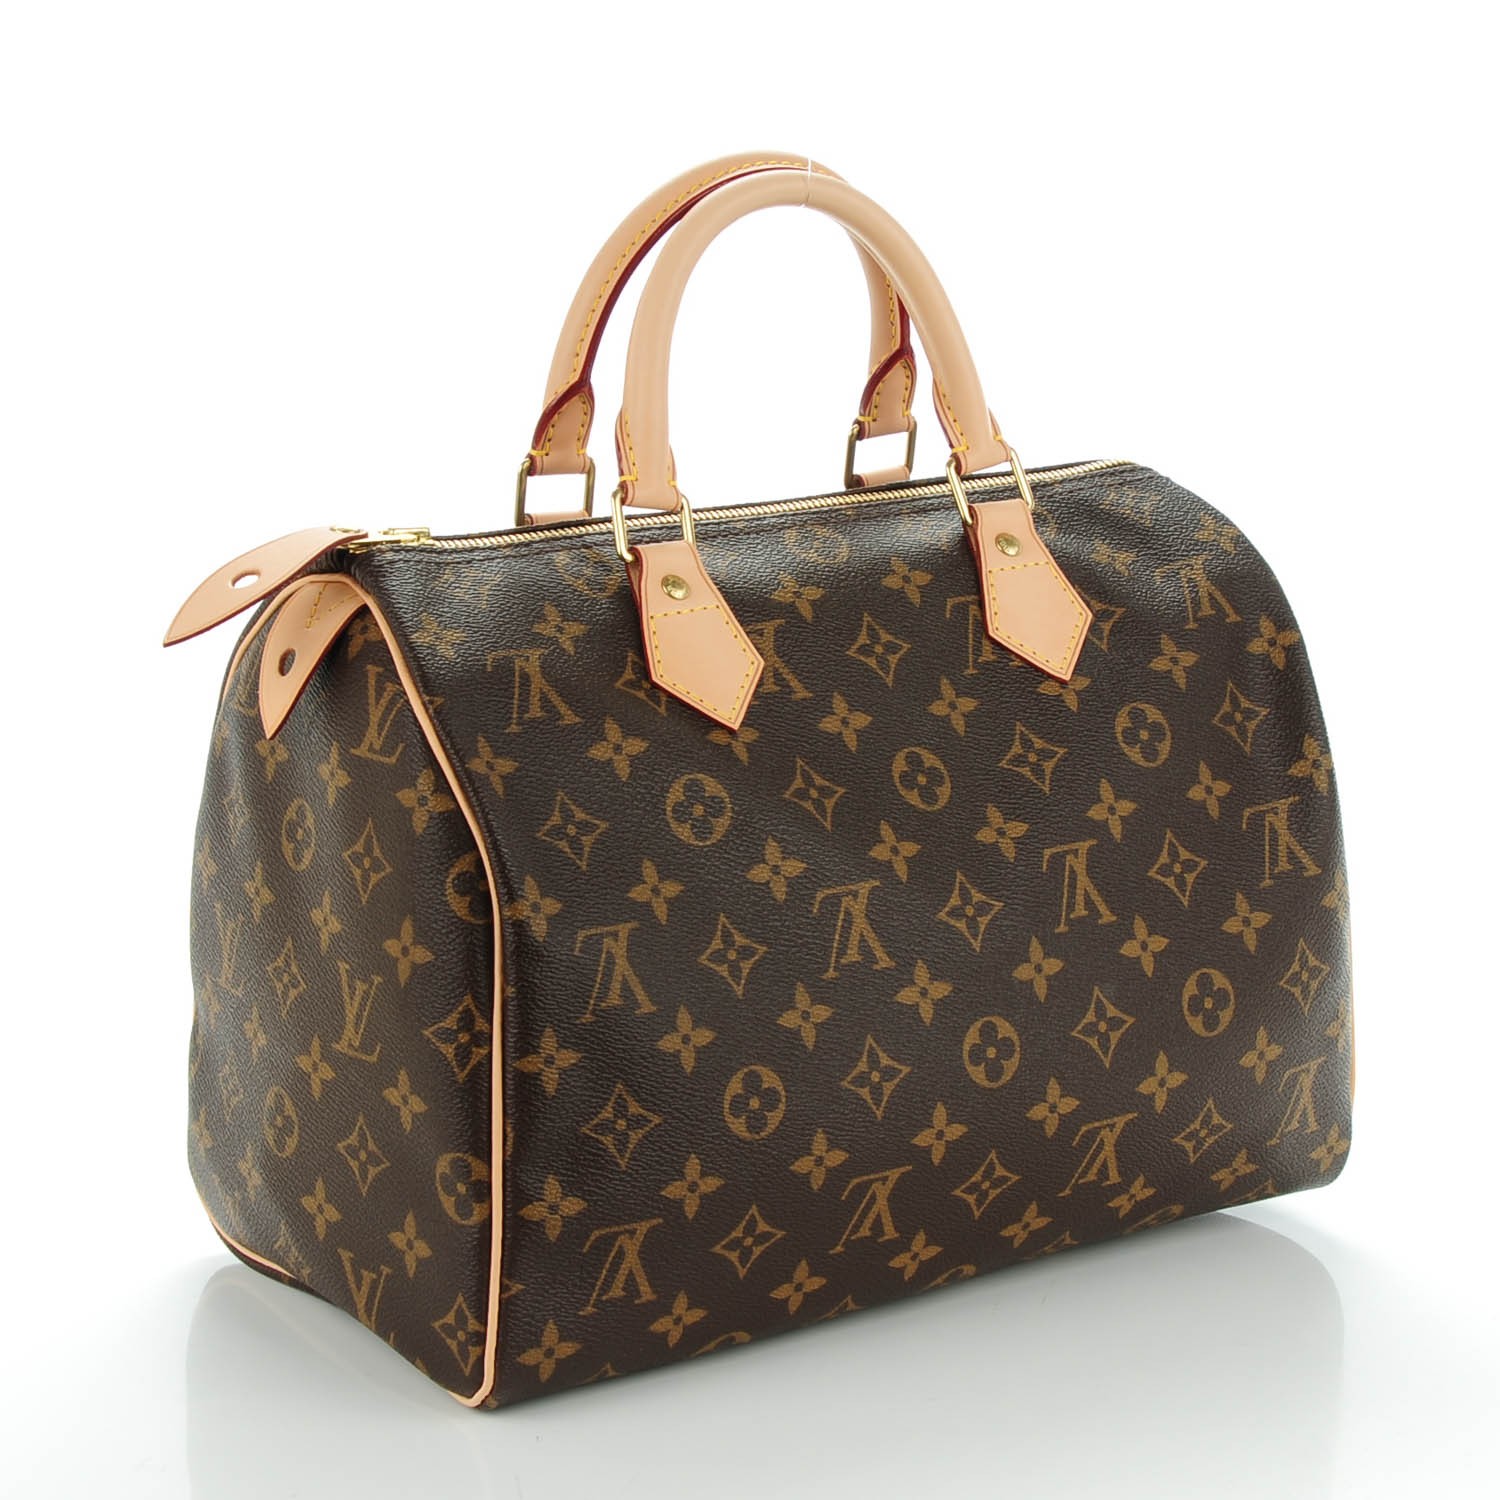 Getting Initials On My Louis Vuitton